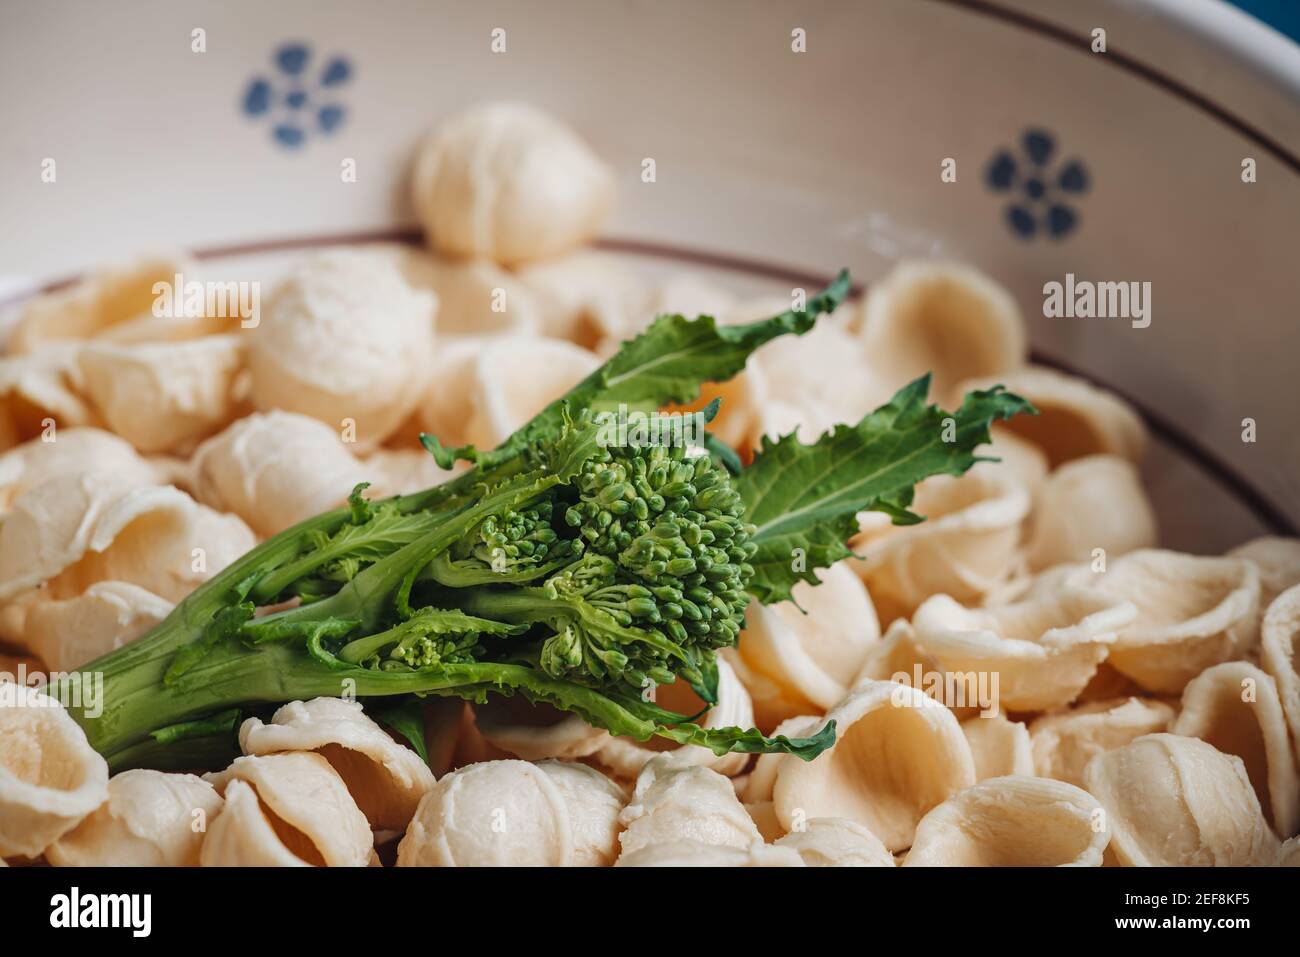 Traditional apulian dish with orecchiette shaped pasta and turnip tops vegetables Stock Photo